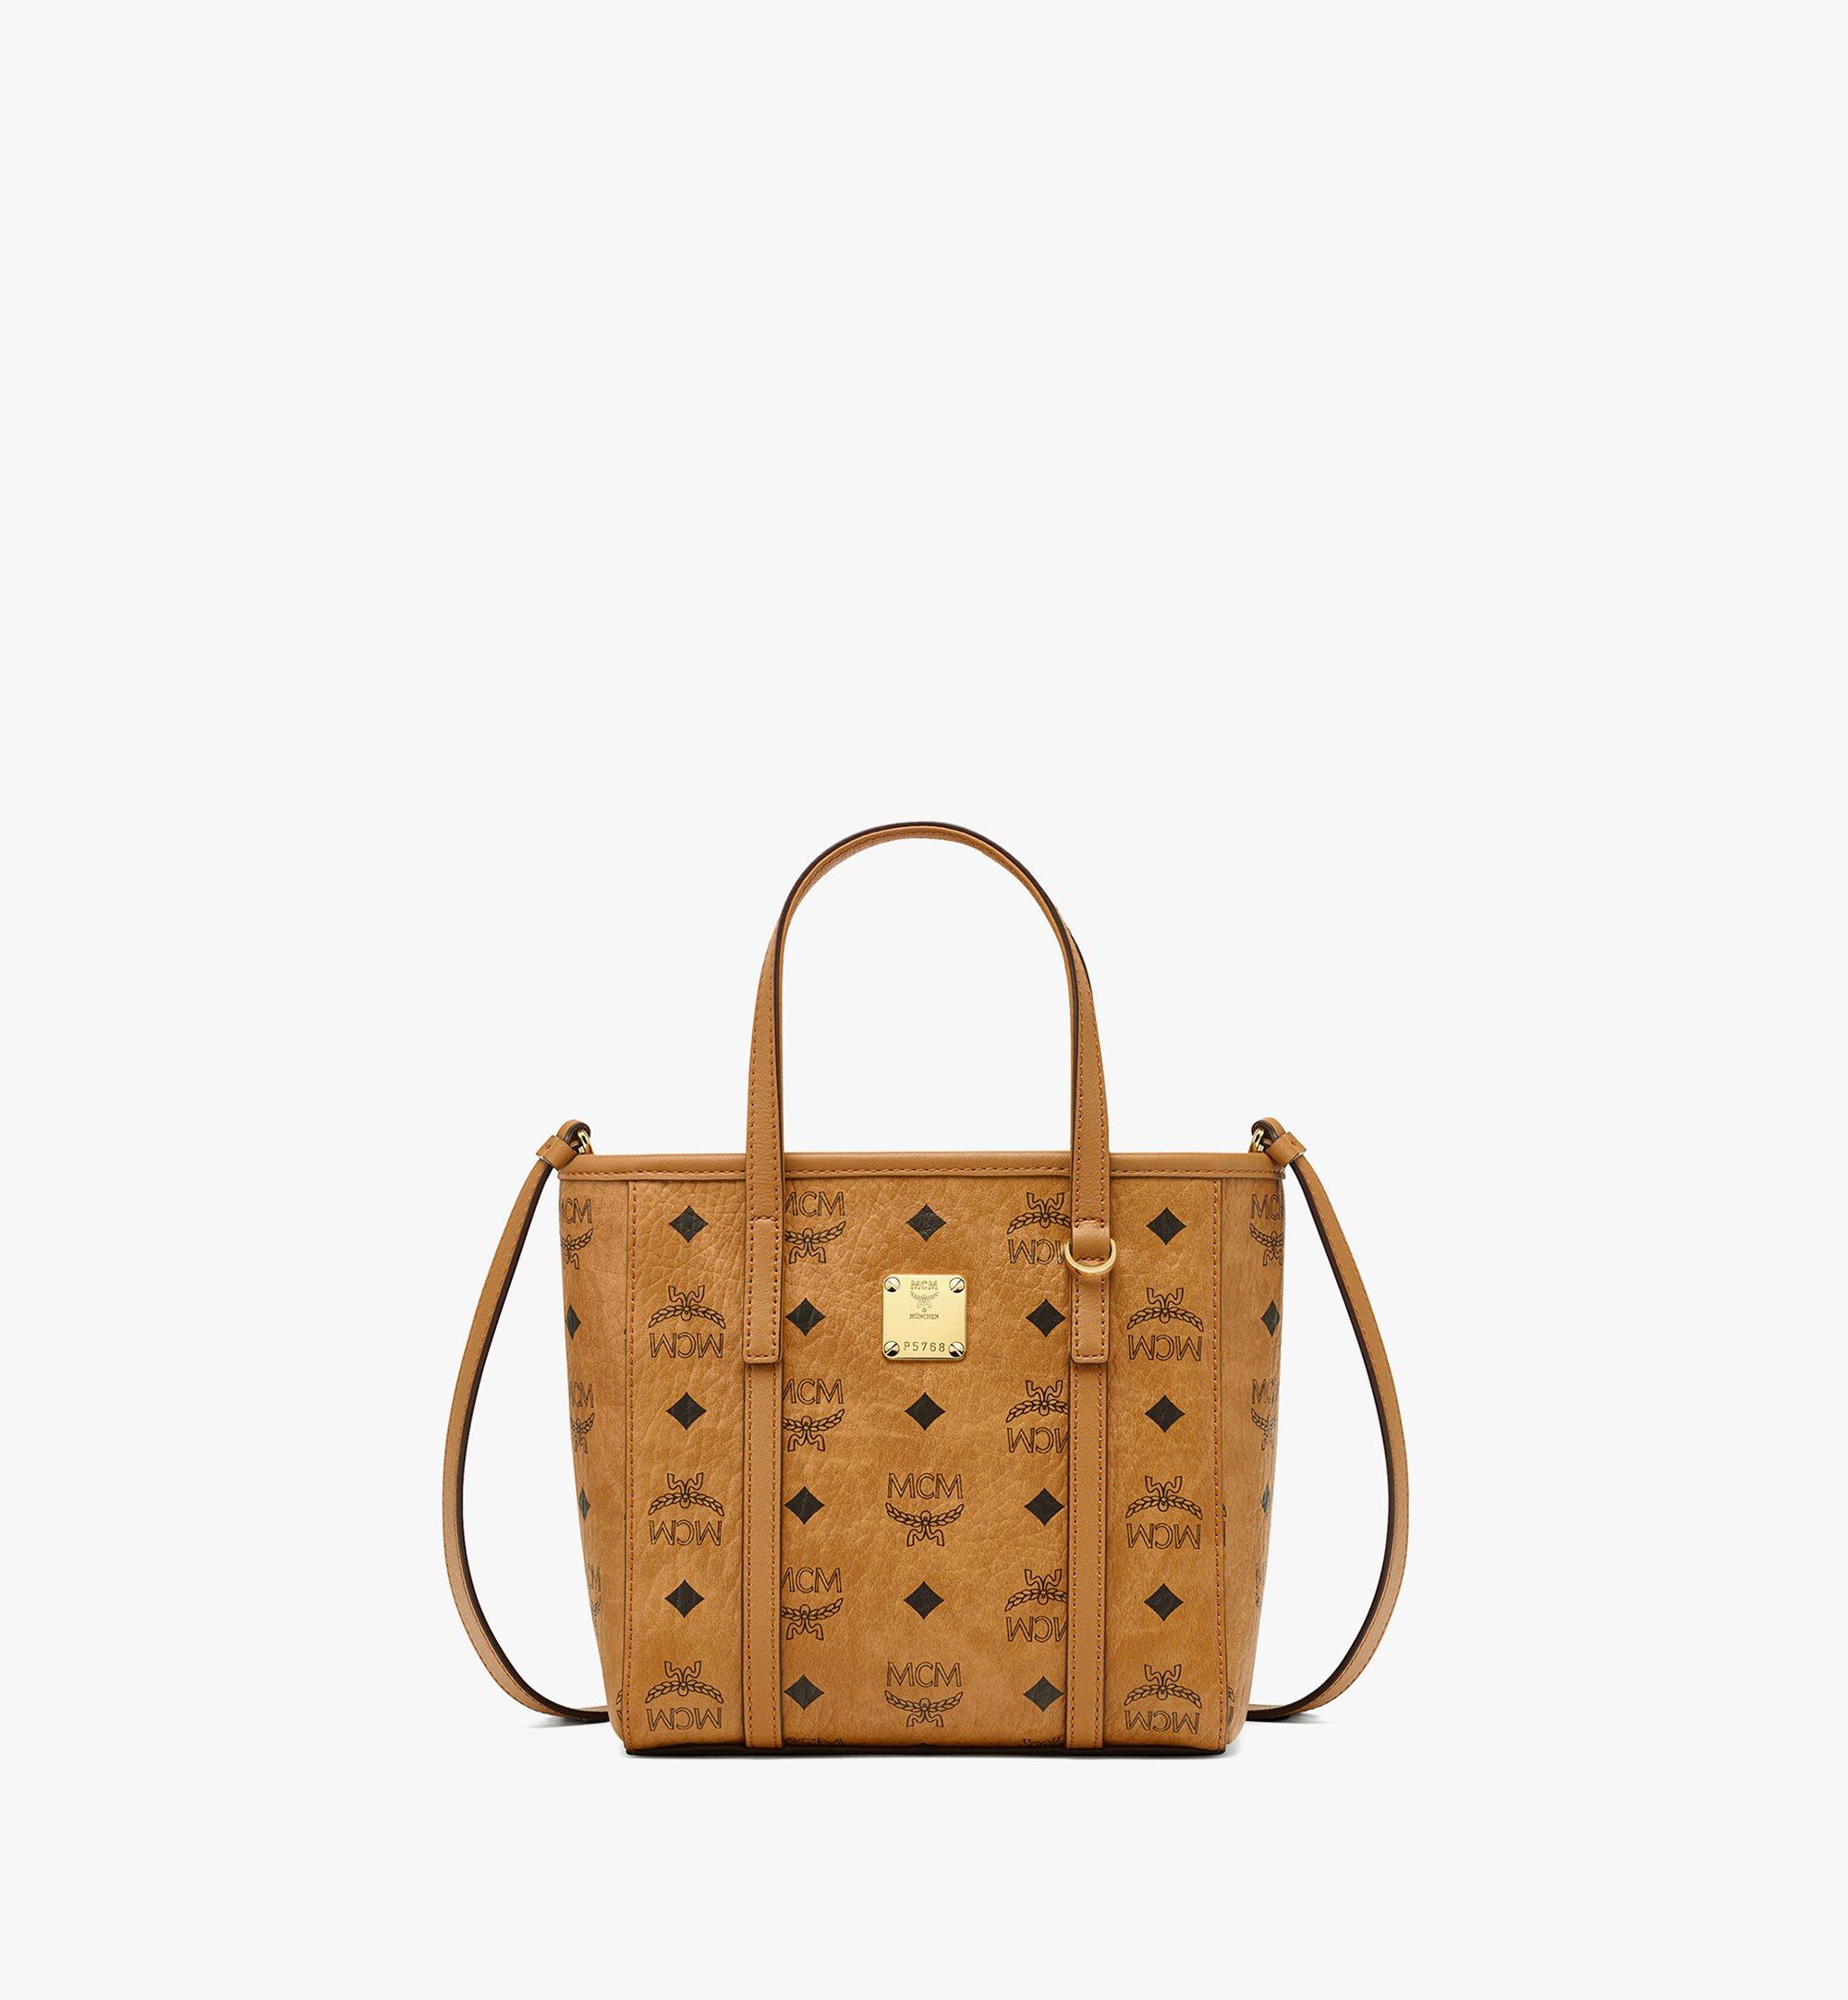 Mcm Box Cross Body Bag ($495) ❤ liked on Polyvore featuring bags